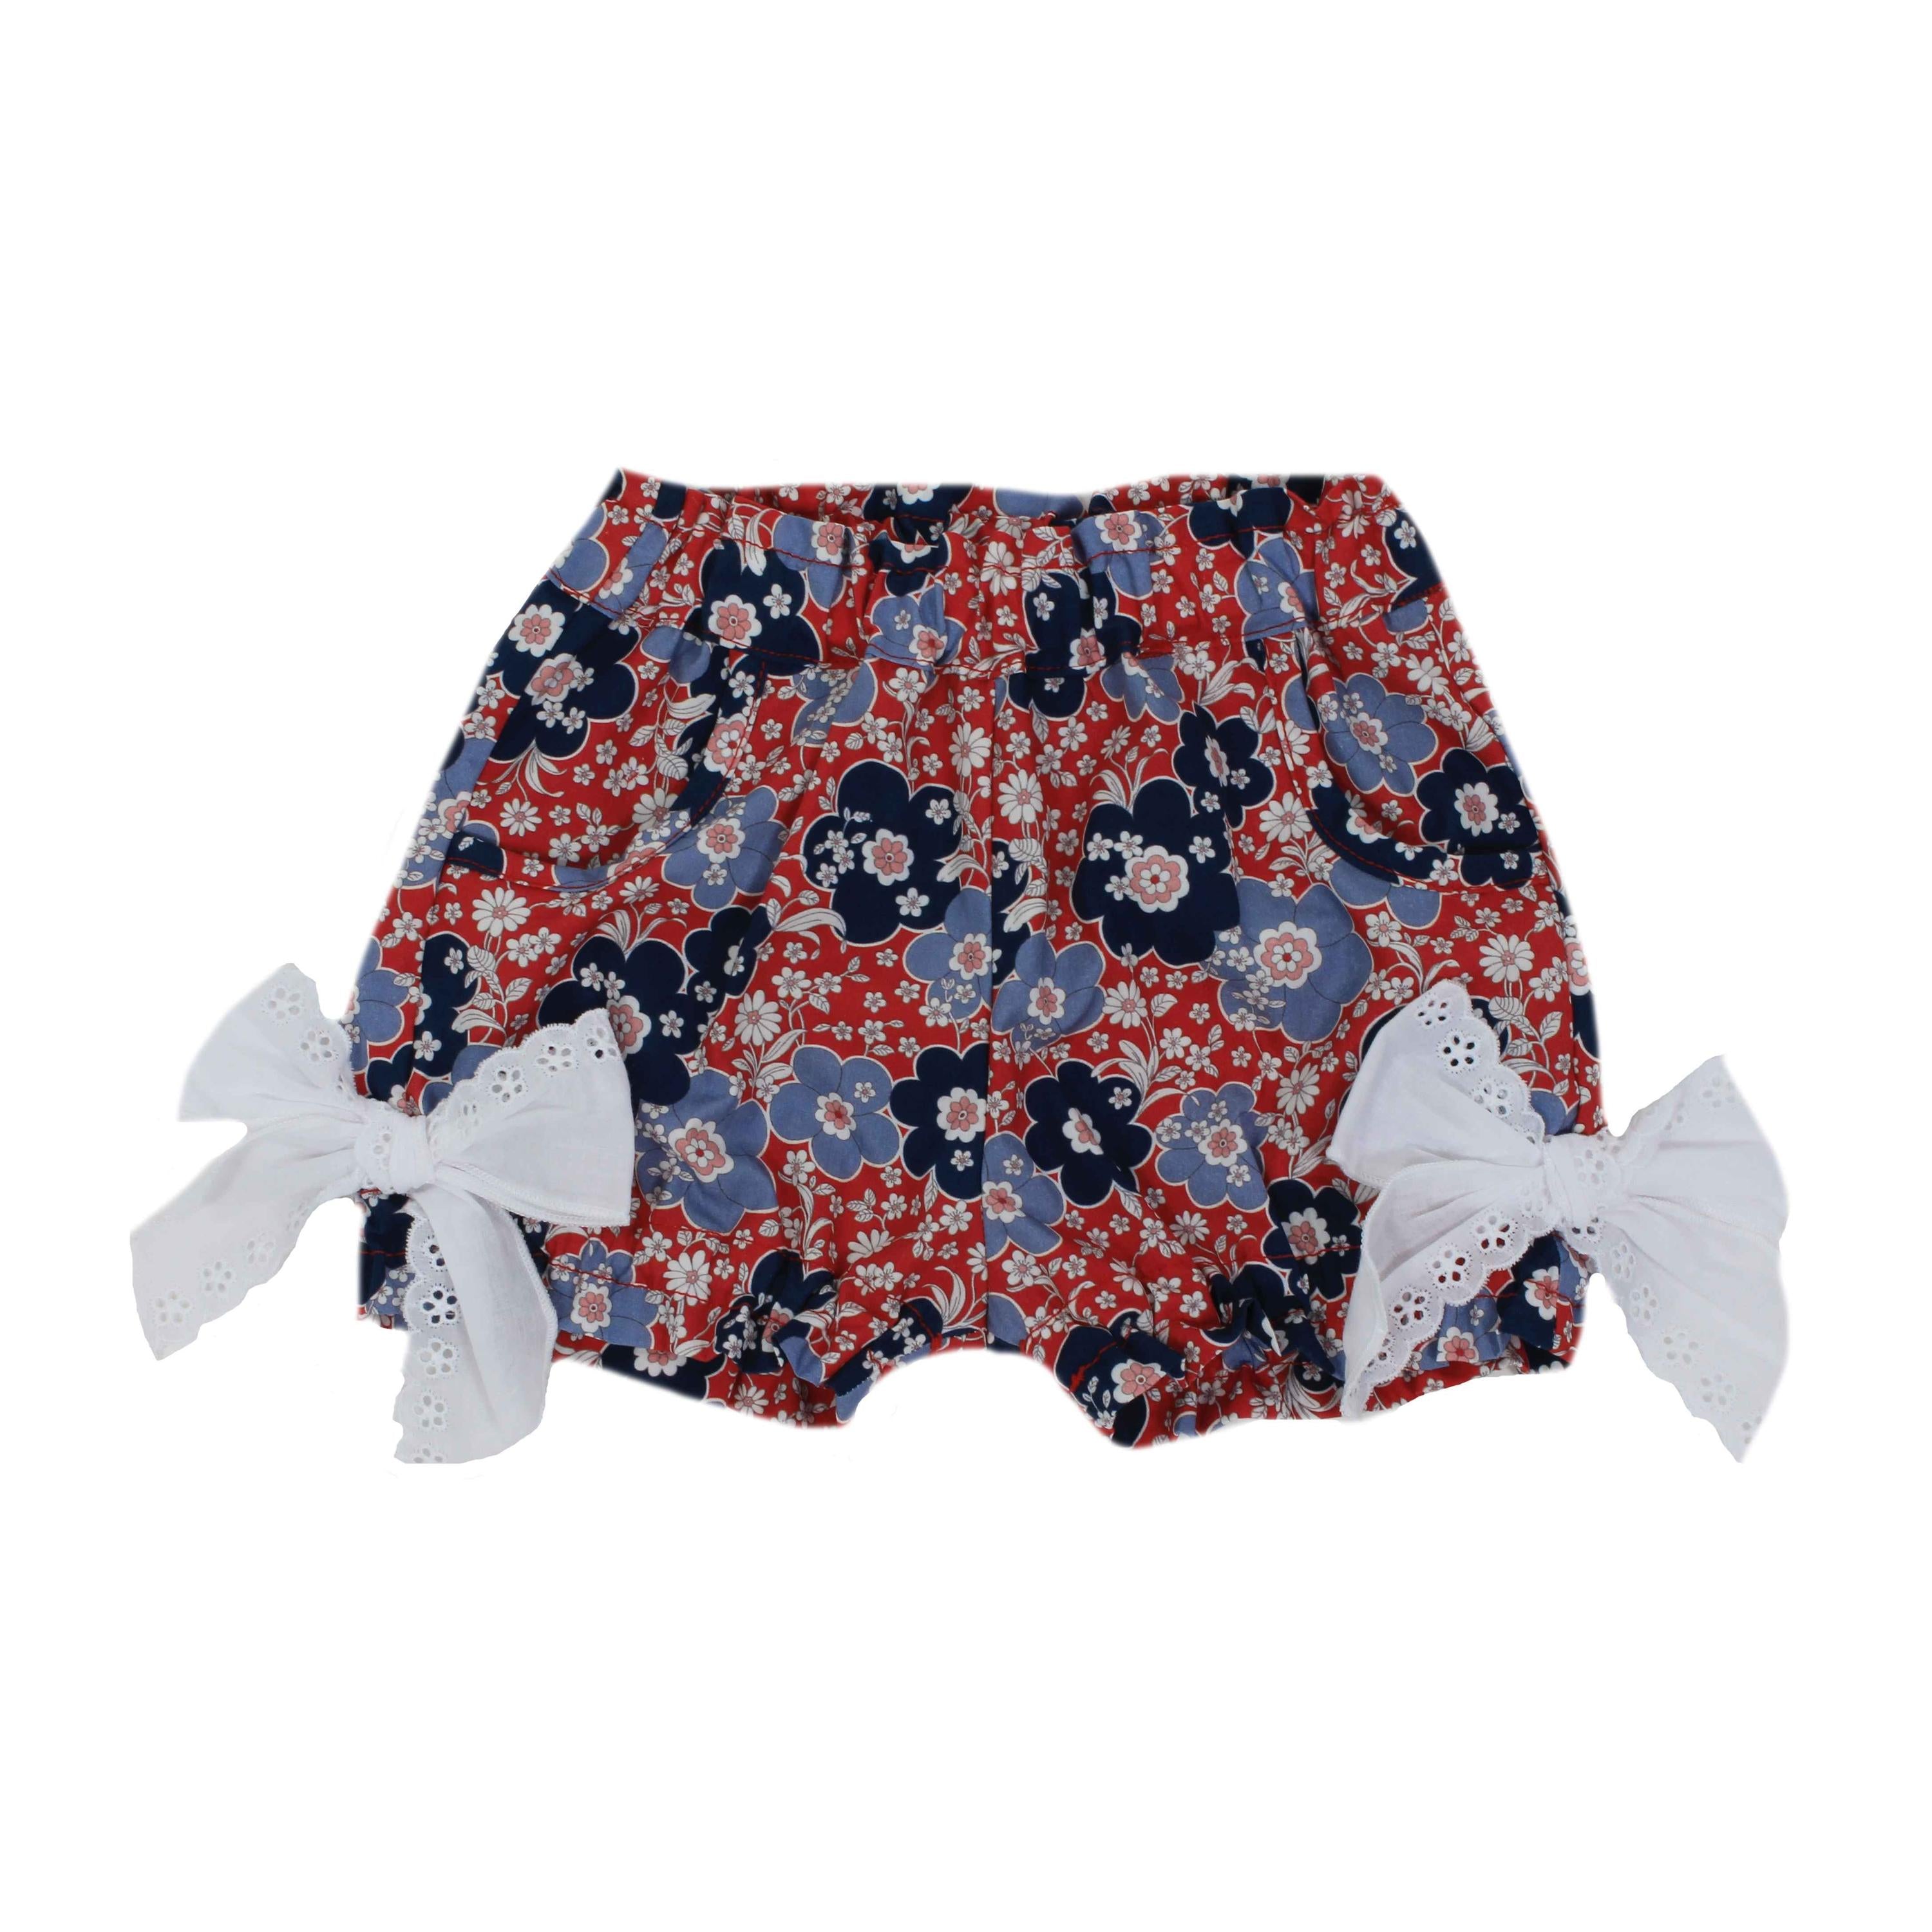 Shorts in Cotone Fantasia Floreale Blu-Rosso Bambina DR KID DK343 - DR.KID - LuxuryKids